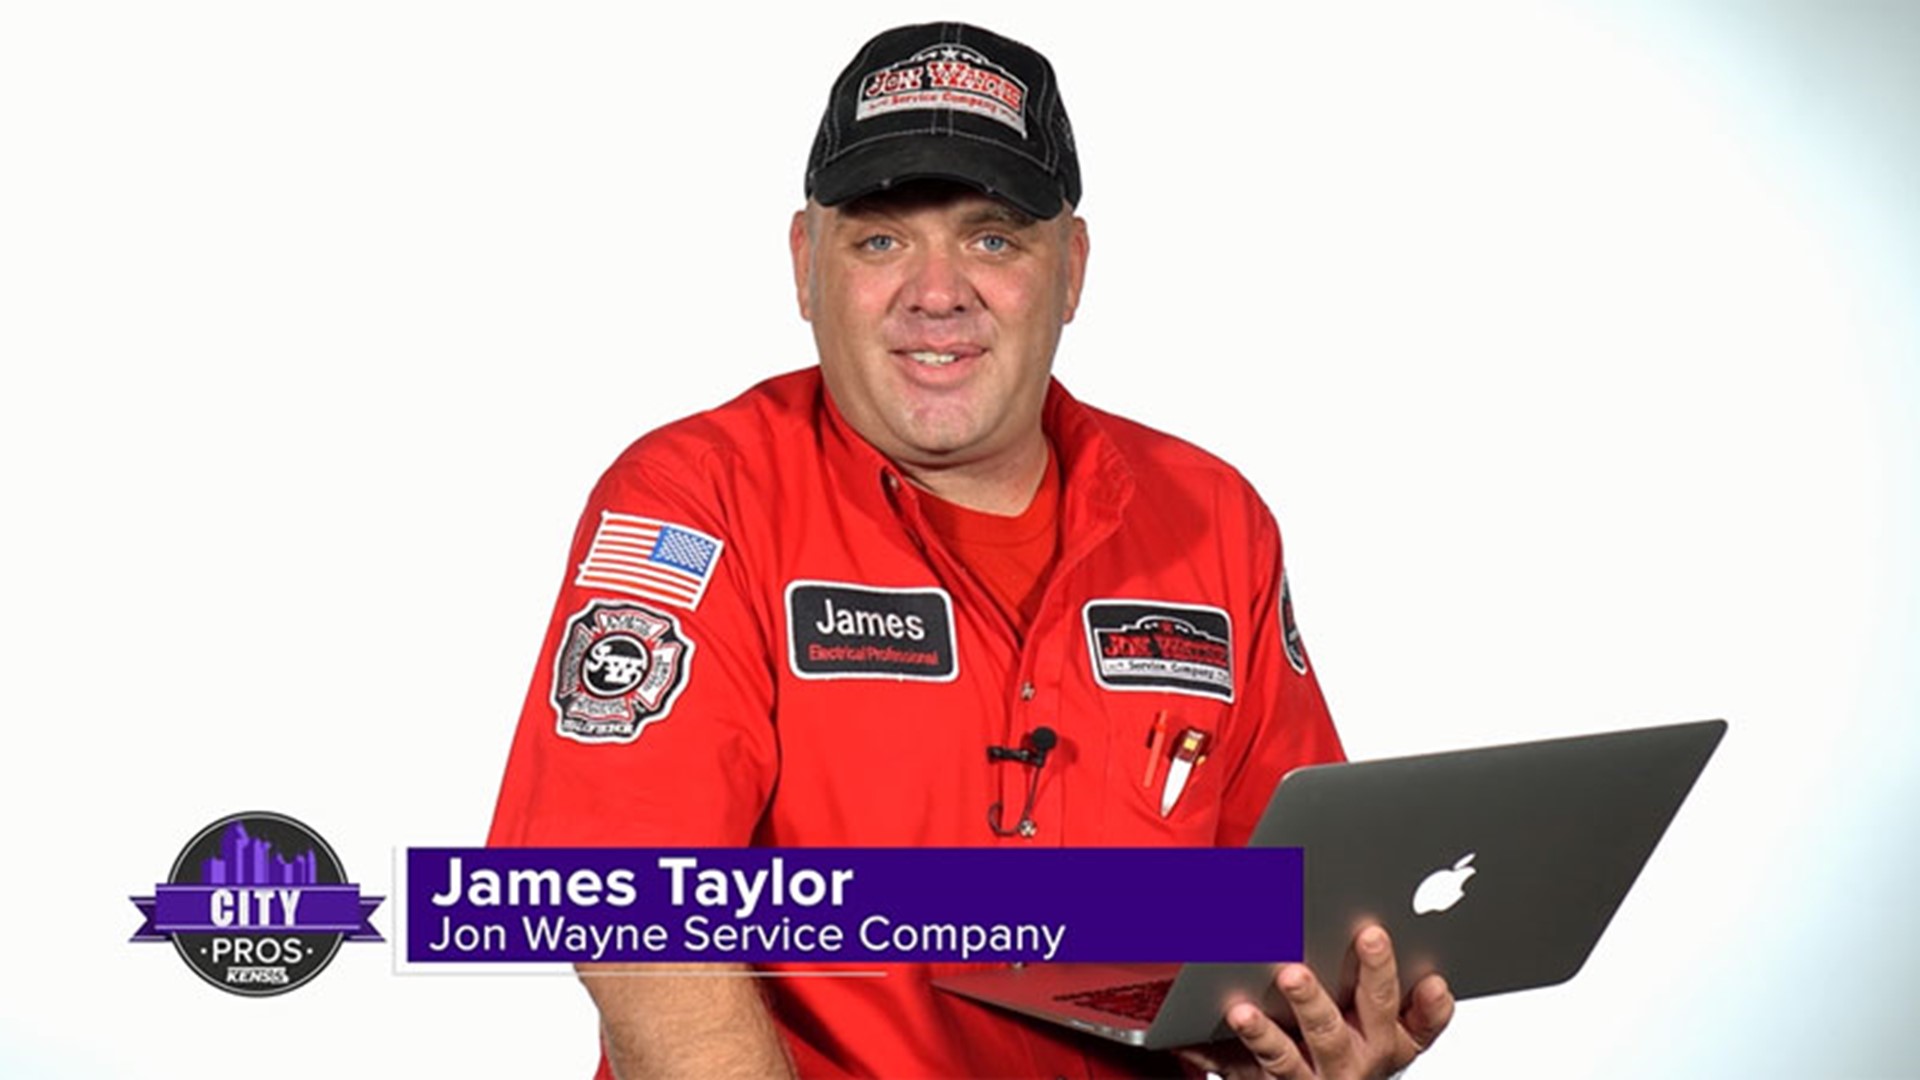 James from Jon Wayne answers questions about updates you can get to make sure your FPE electrical panel is safe.